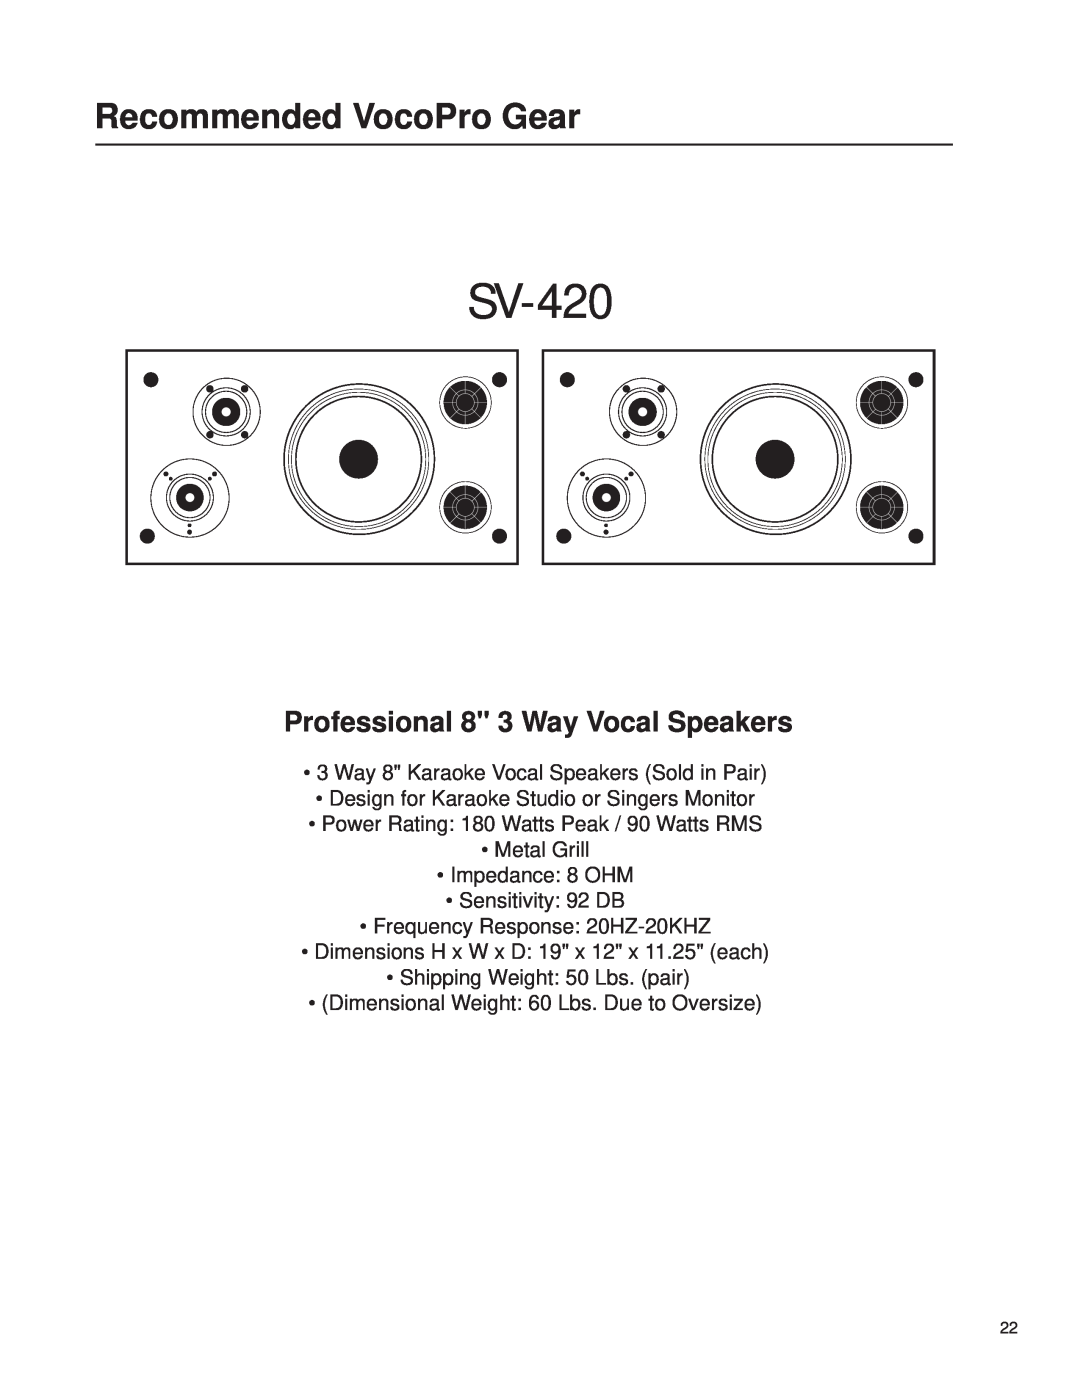 VocoPro DA-3600Pro2 owner manual SV-420, Professional 8 3 Way Vocal Speakers, Recommended VocoPro Gear 